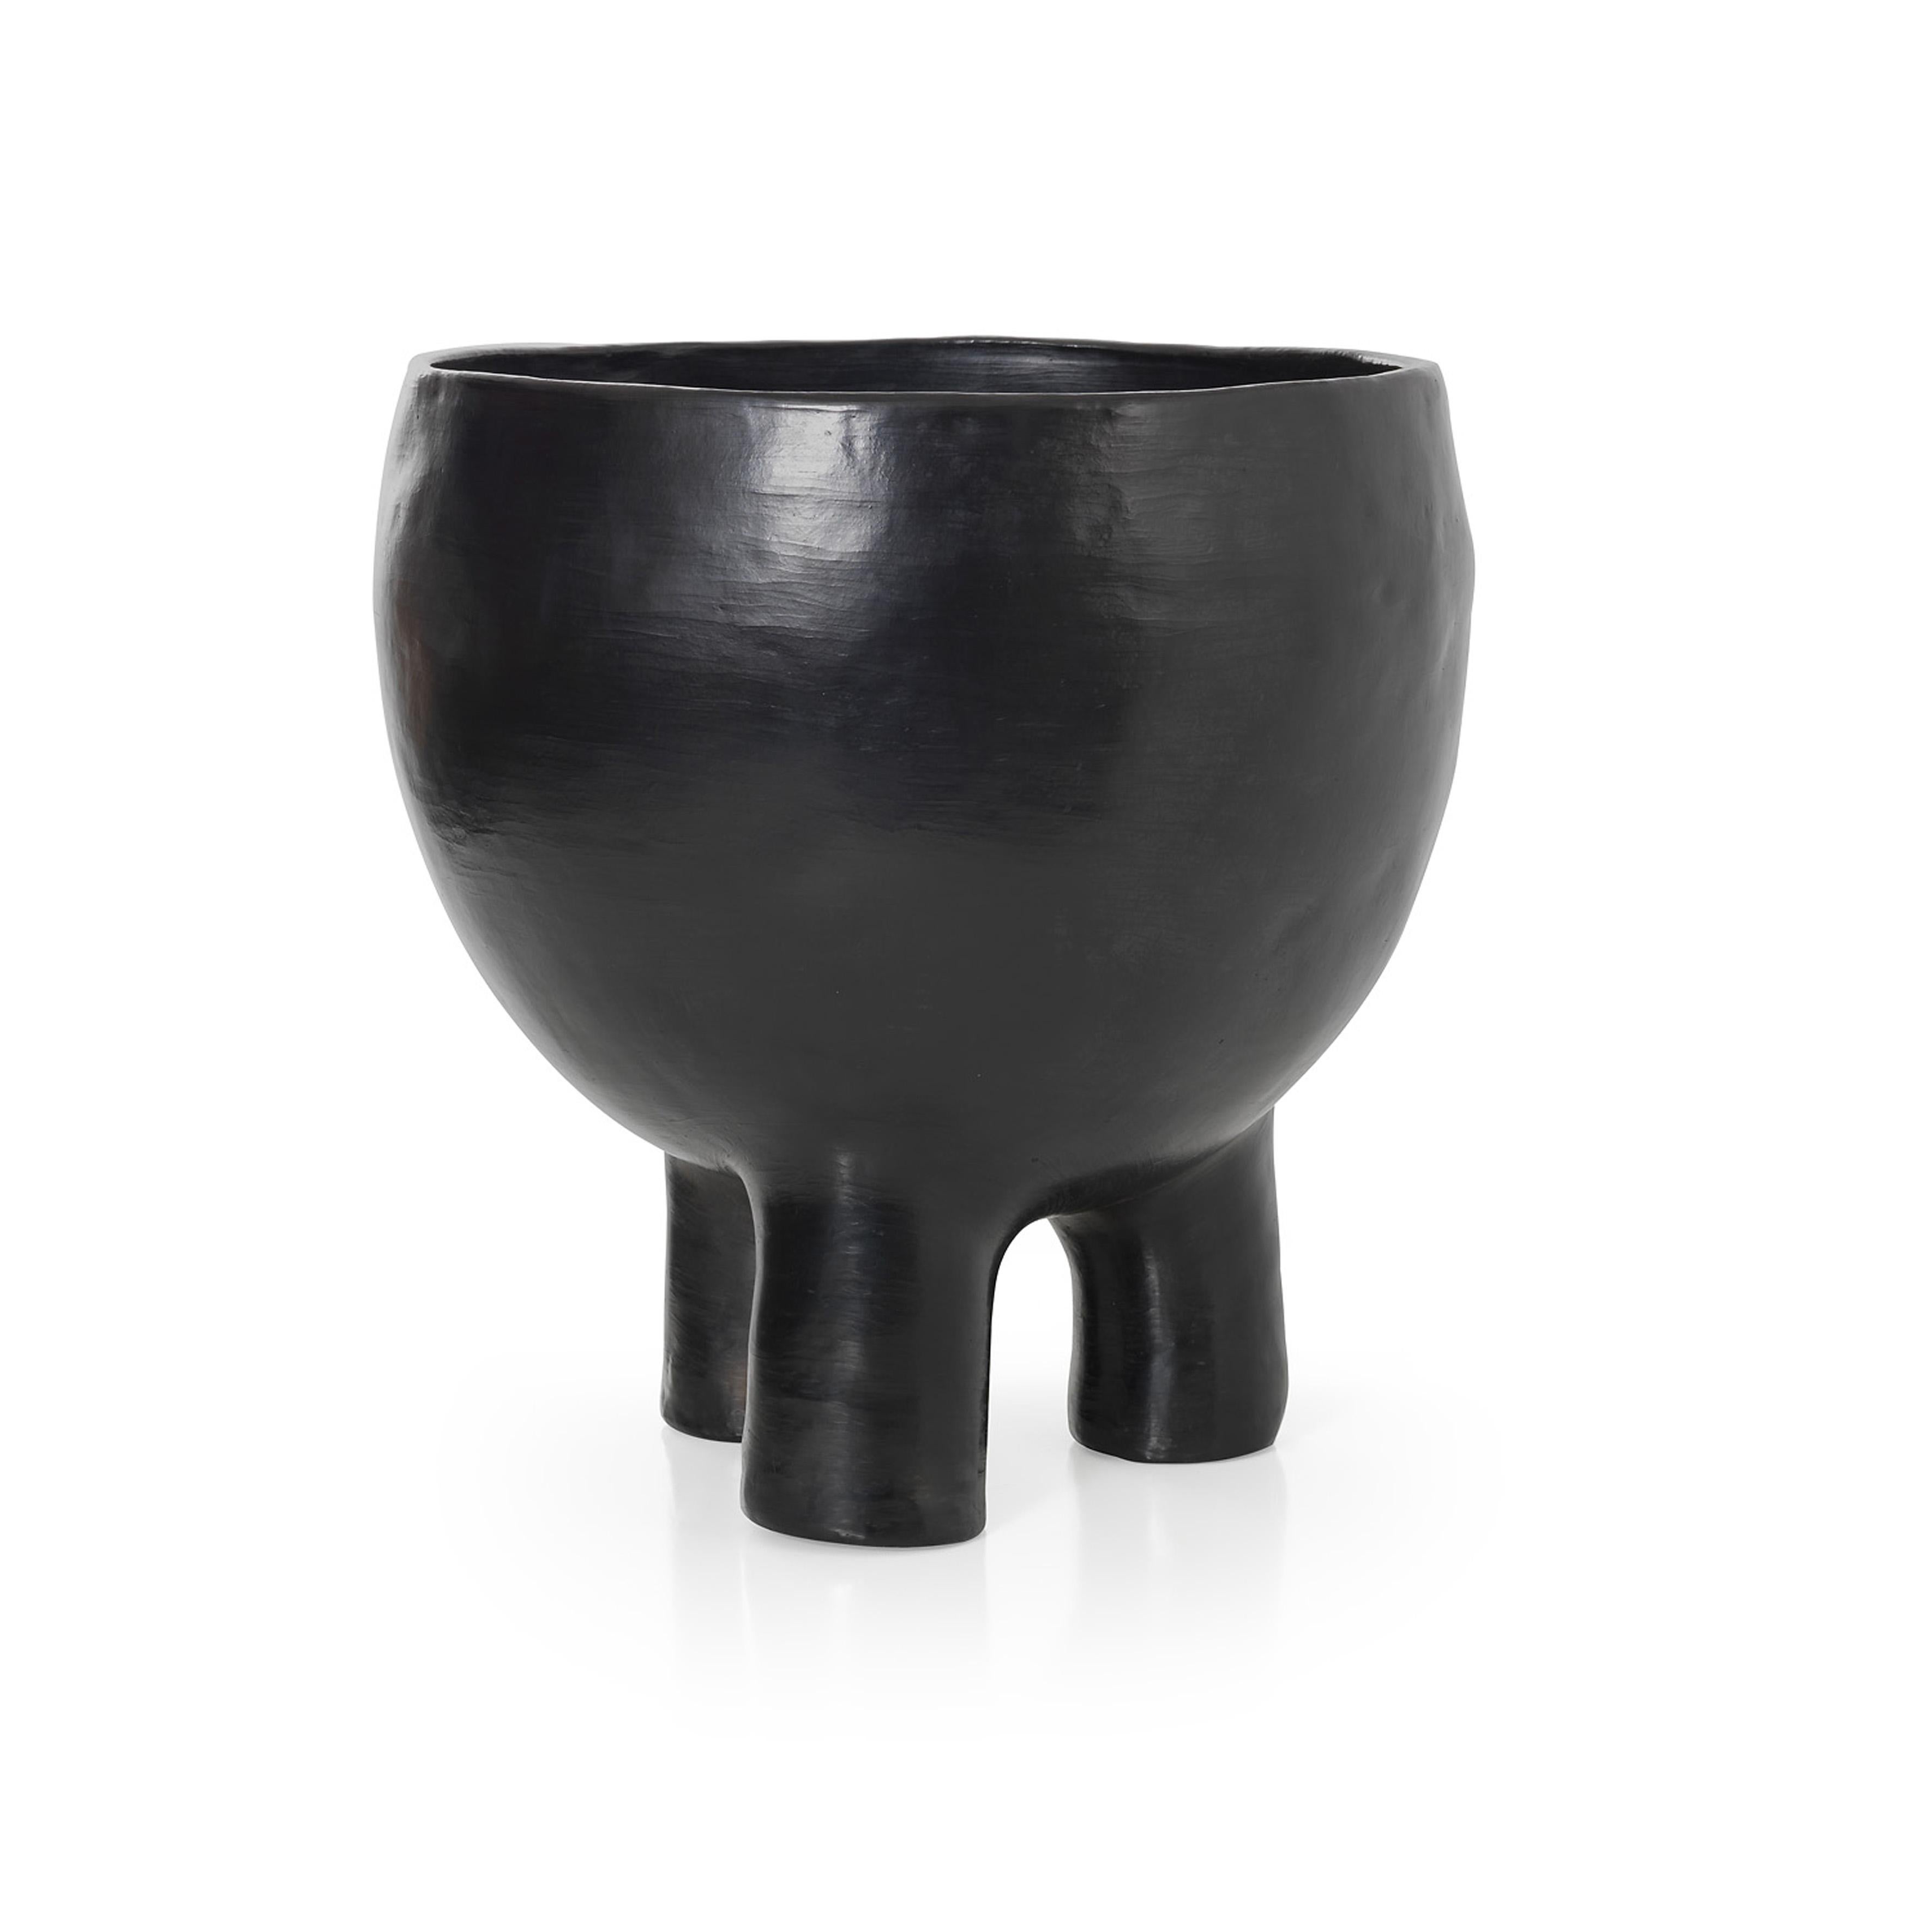 Large Pot 2 by Sebastian Herkner
Materials: Heat-resistant black ceramic. 
Technique: Glazed. Oven cooked and polished with semi-precious stones. 
Dimensions: Diameter 43 cm x H 45 cm 
Available in sizes Small and Mini.

This pot belongs to